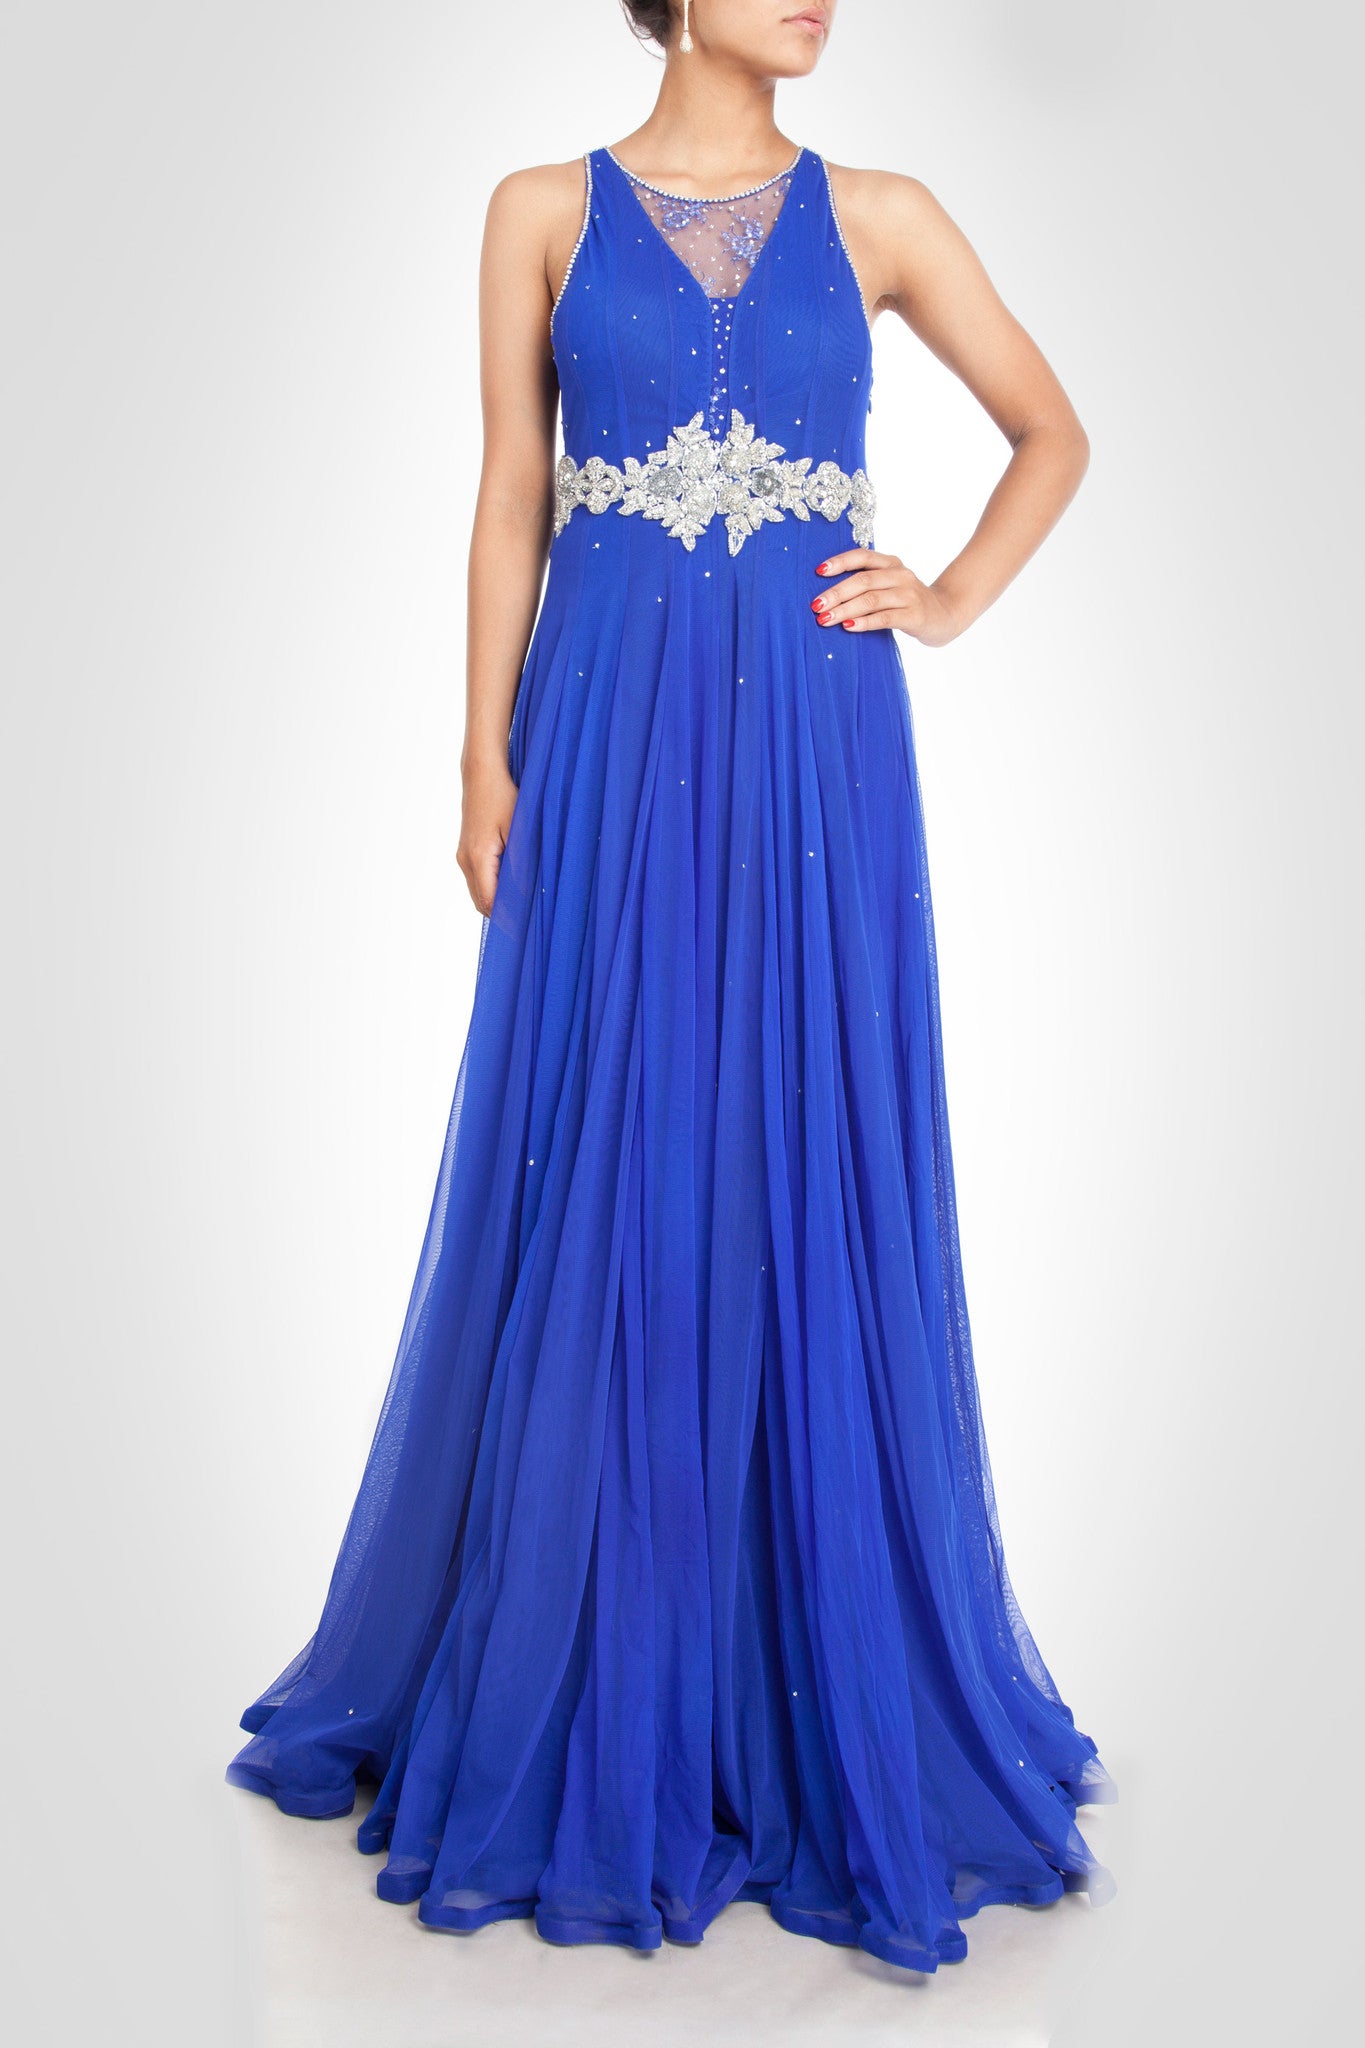 9 Beautiful Designs of Blue Colour Frocks for Women and Girls | Girls  pageant dresses, Girls pageant gowns, Girls dresses